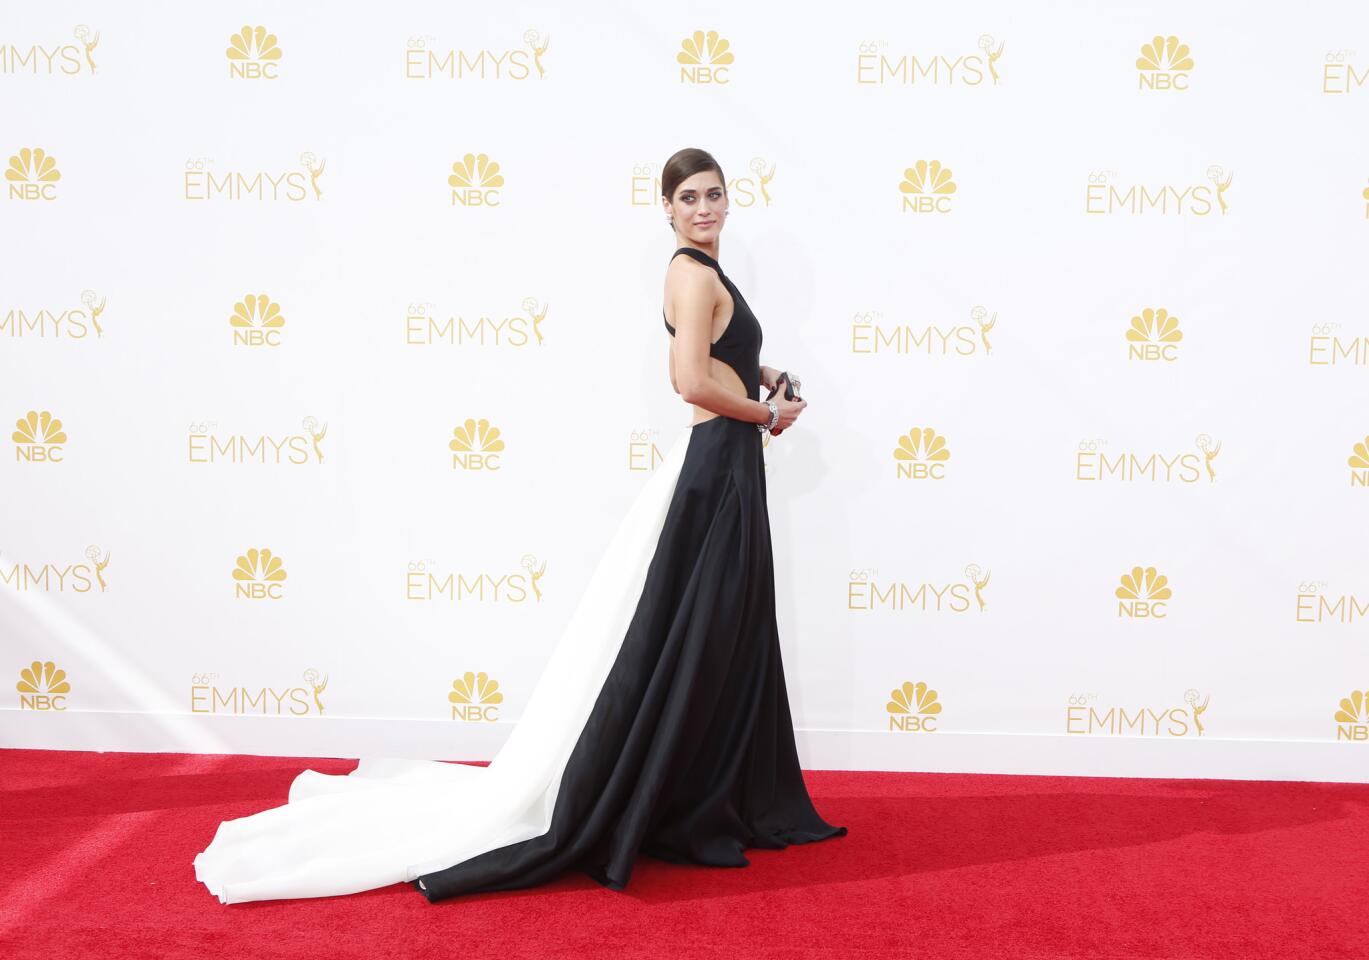 Lizzy Caplan arriving at the 2014 Emmy Awards at L.A. Live.